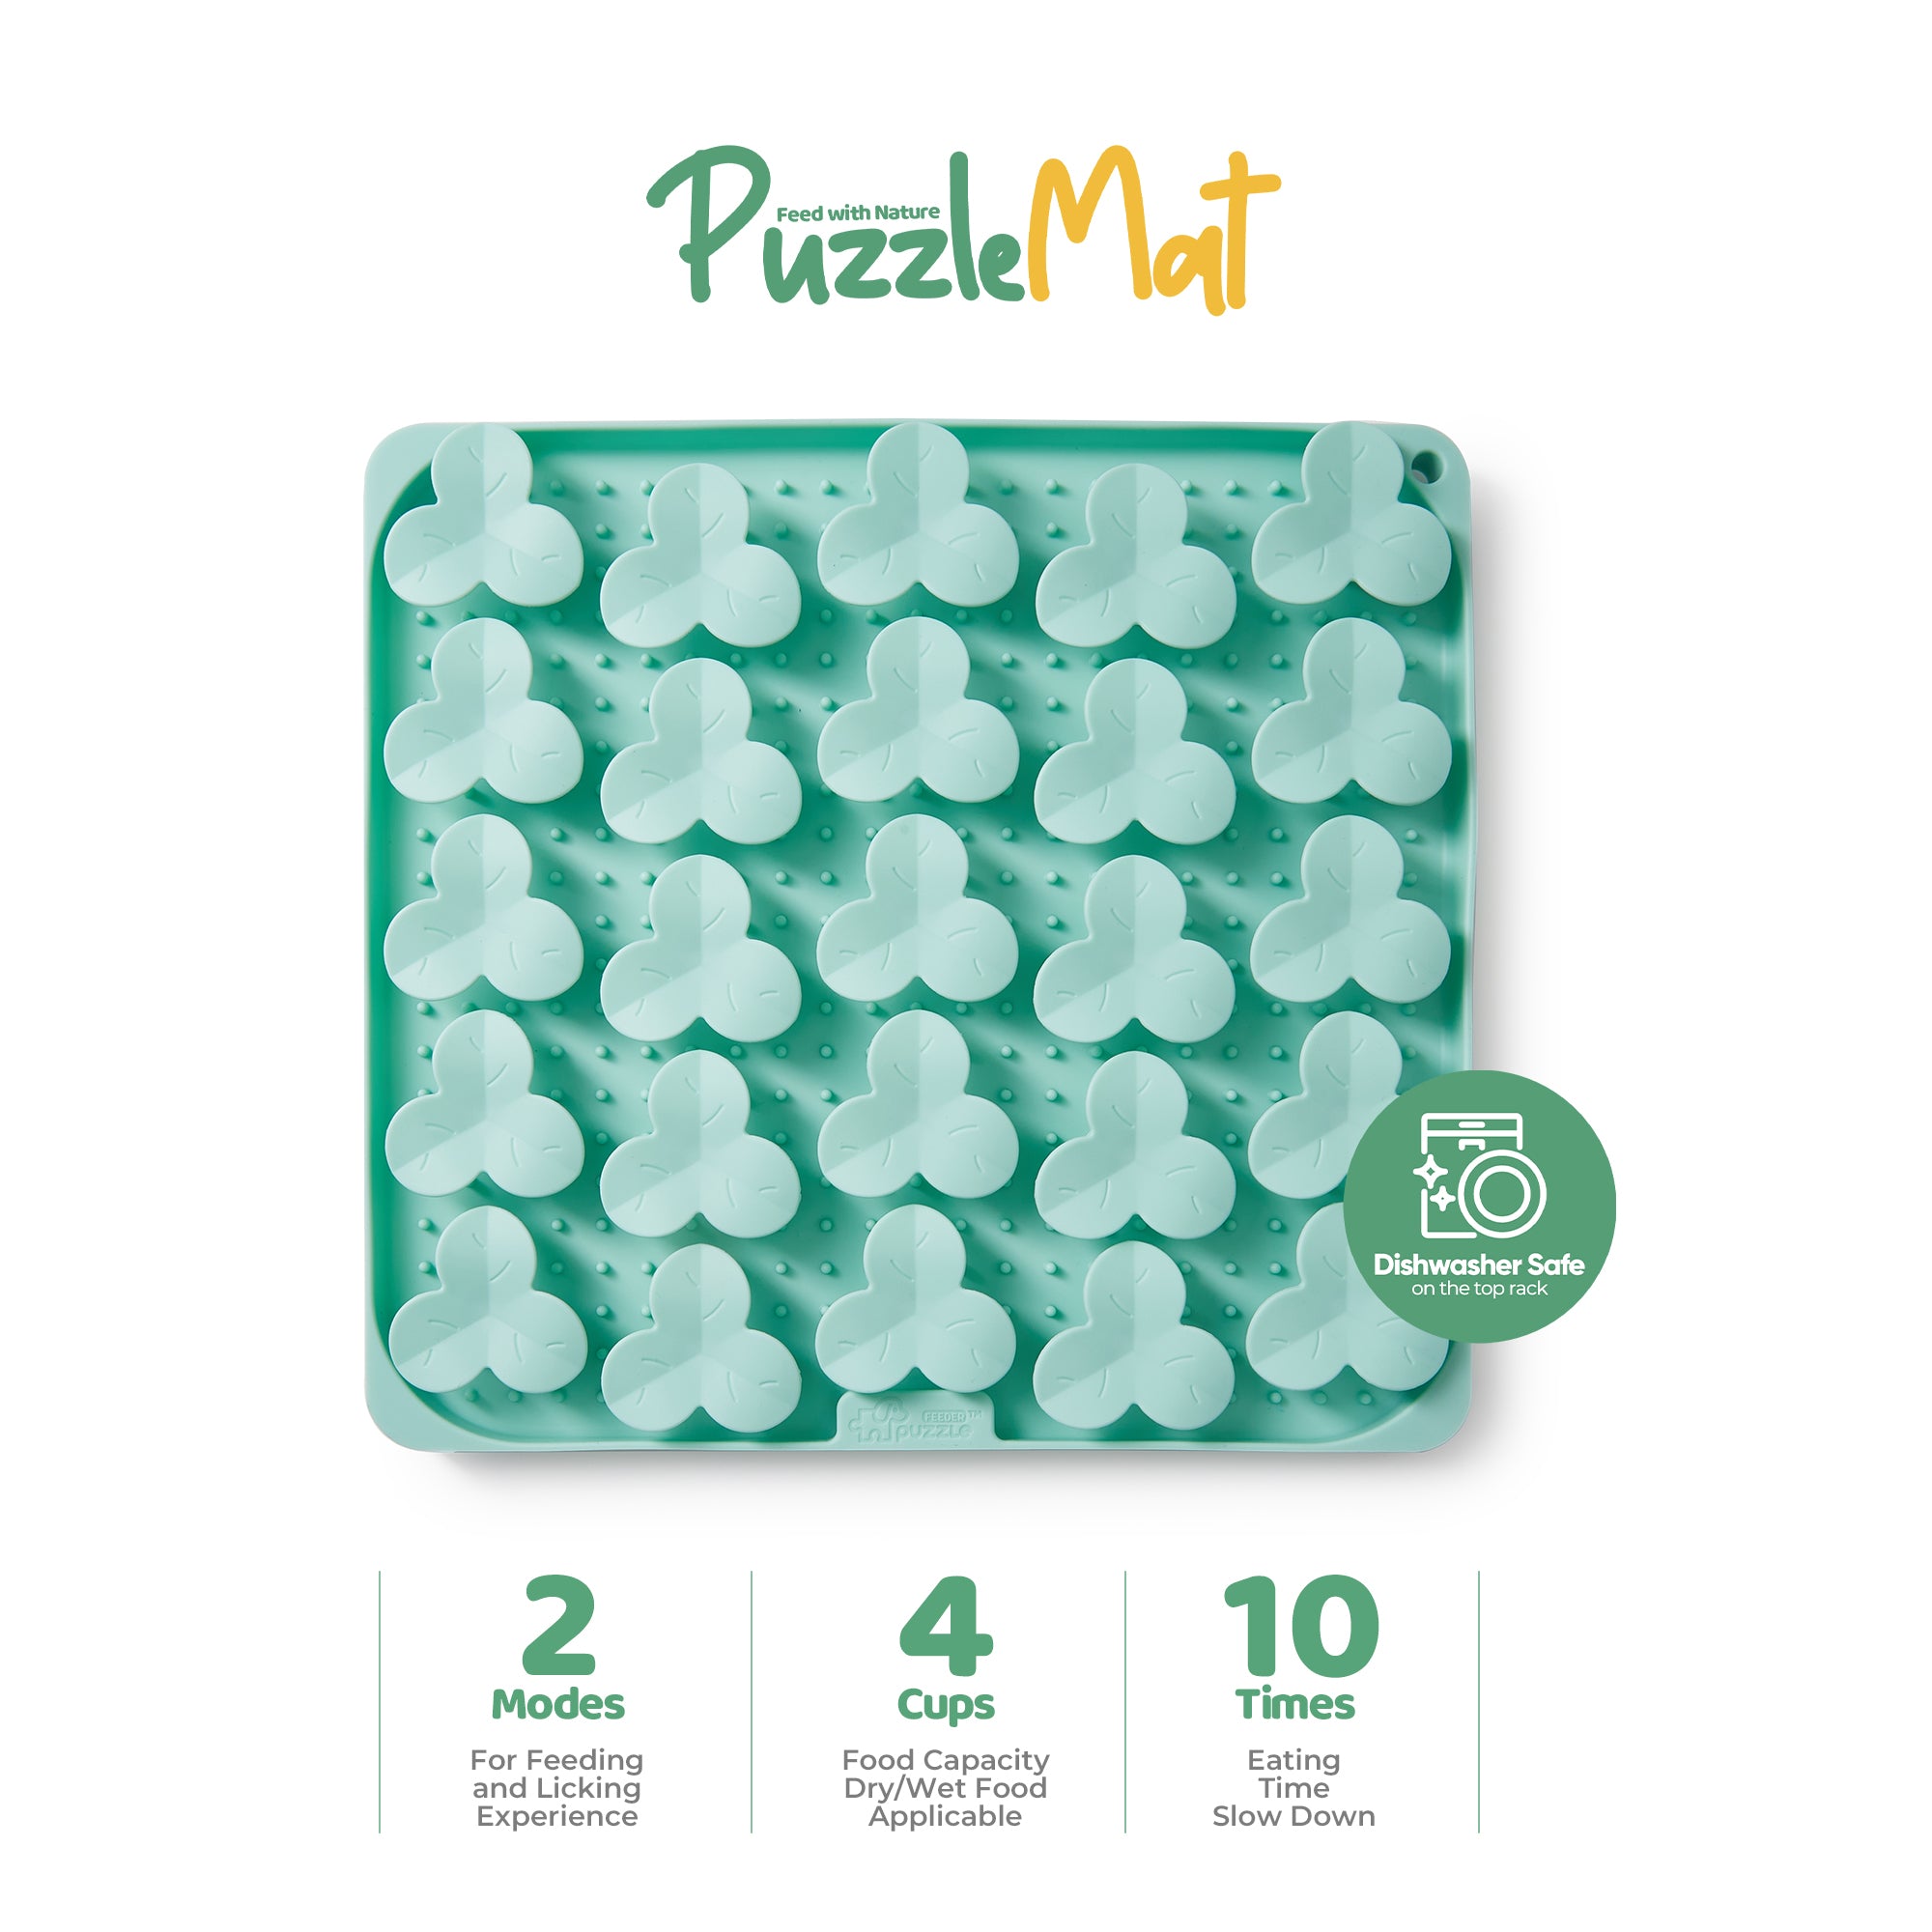 Puzzle Mat / Feed with Nature (Lawn-Green)